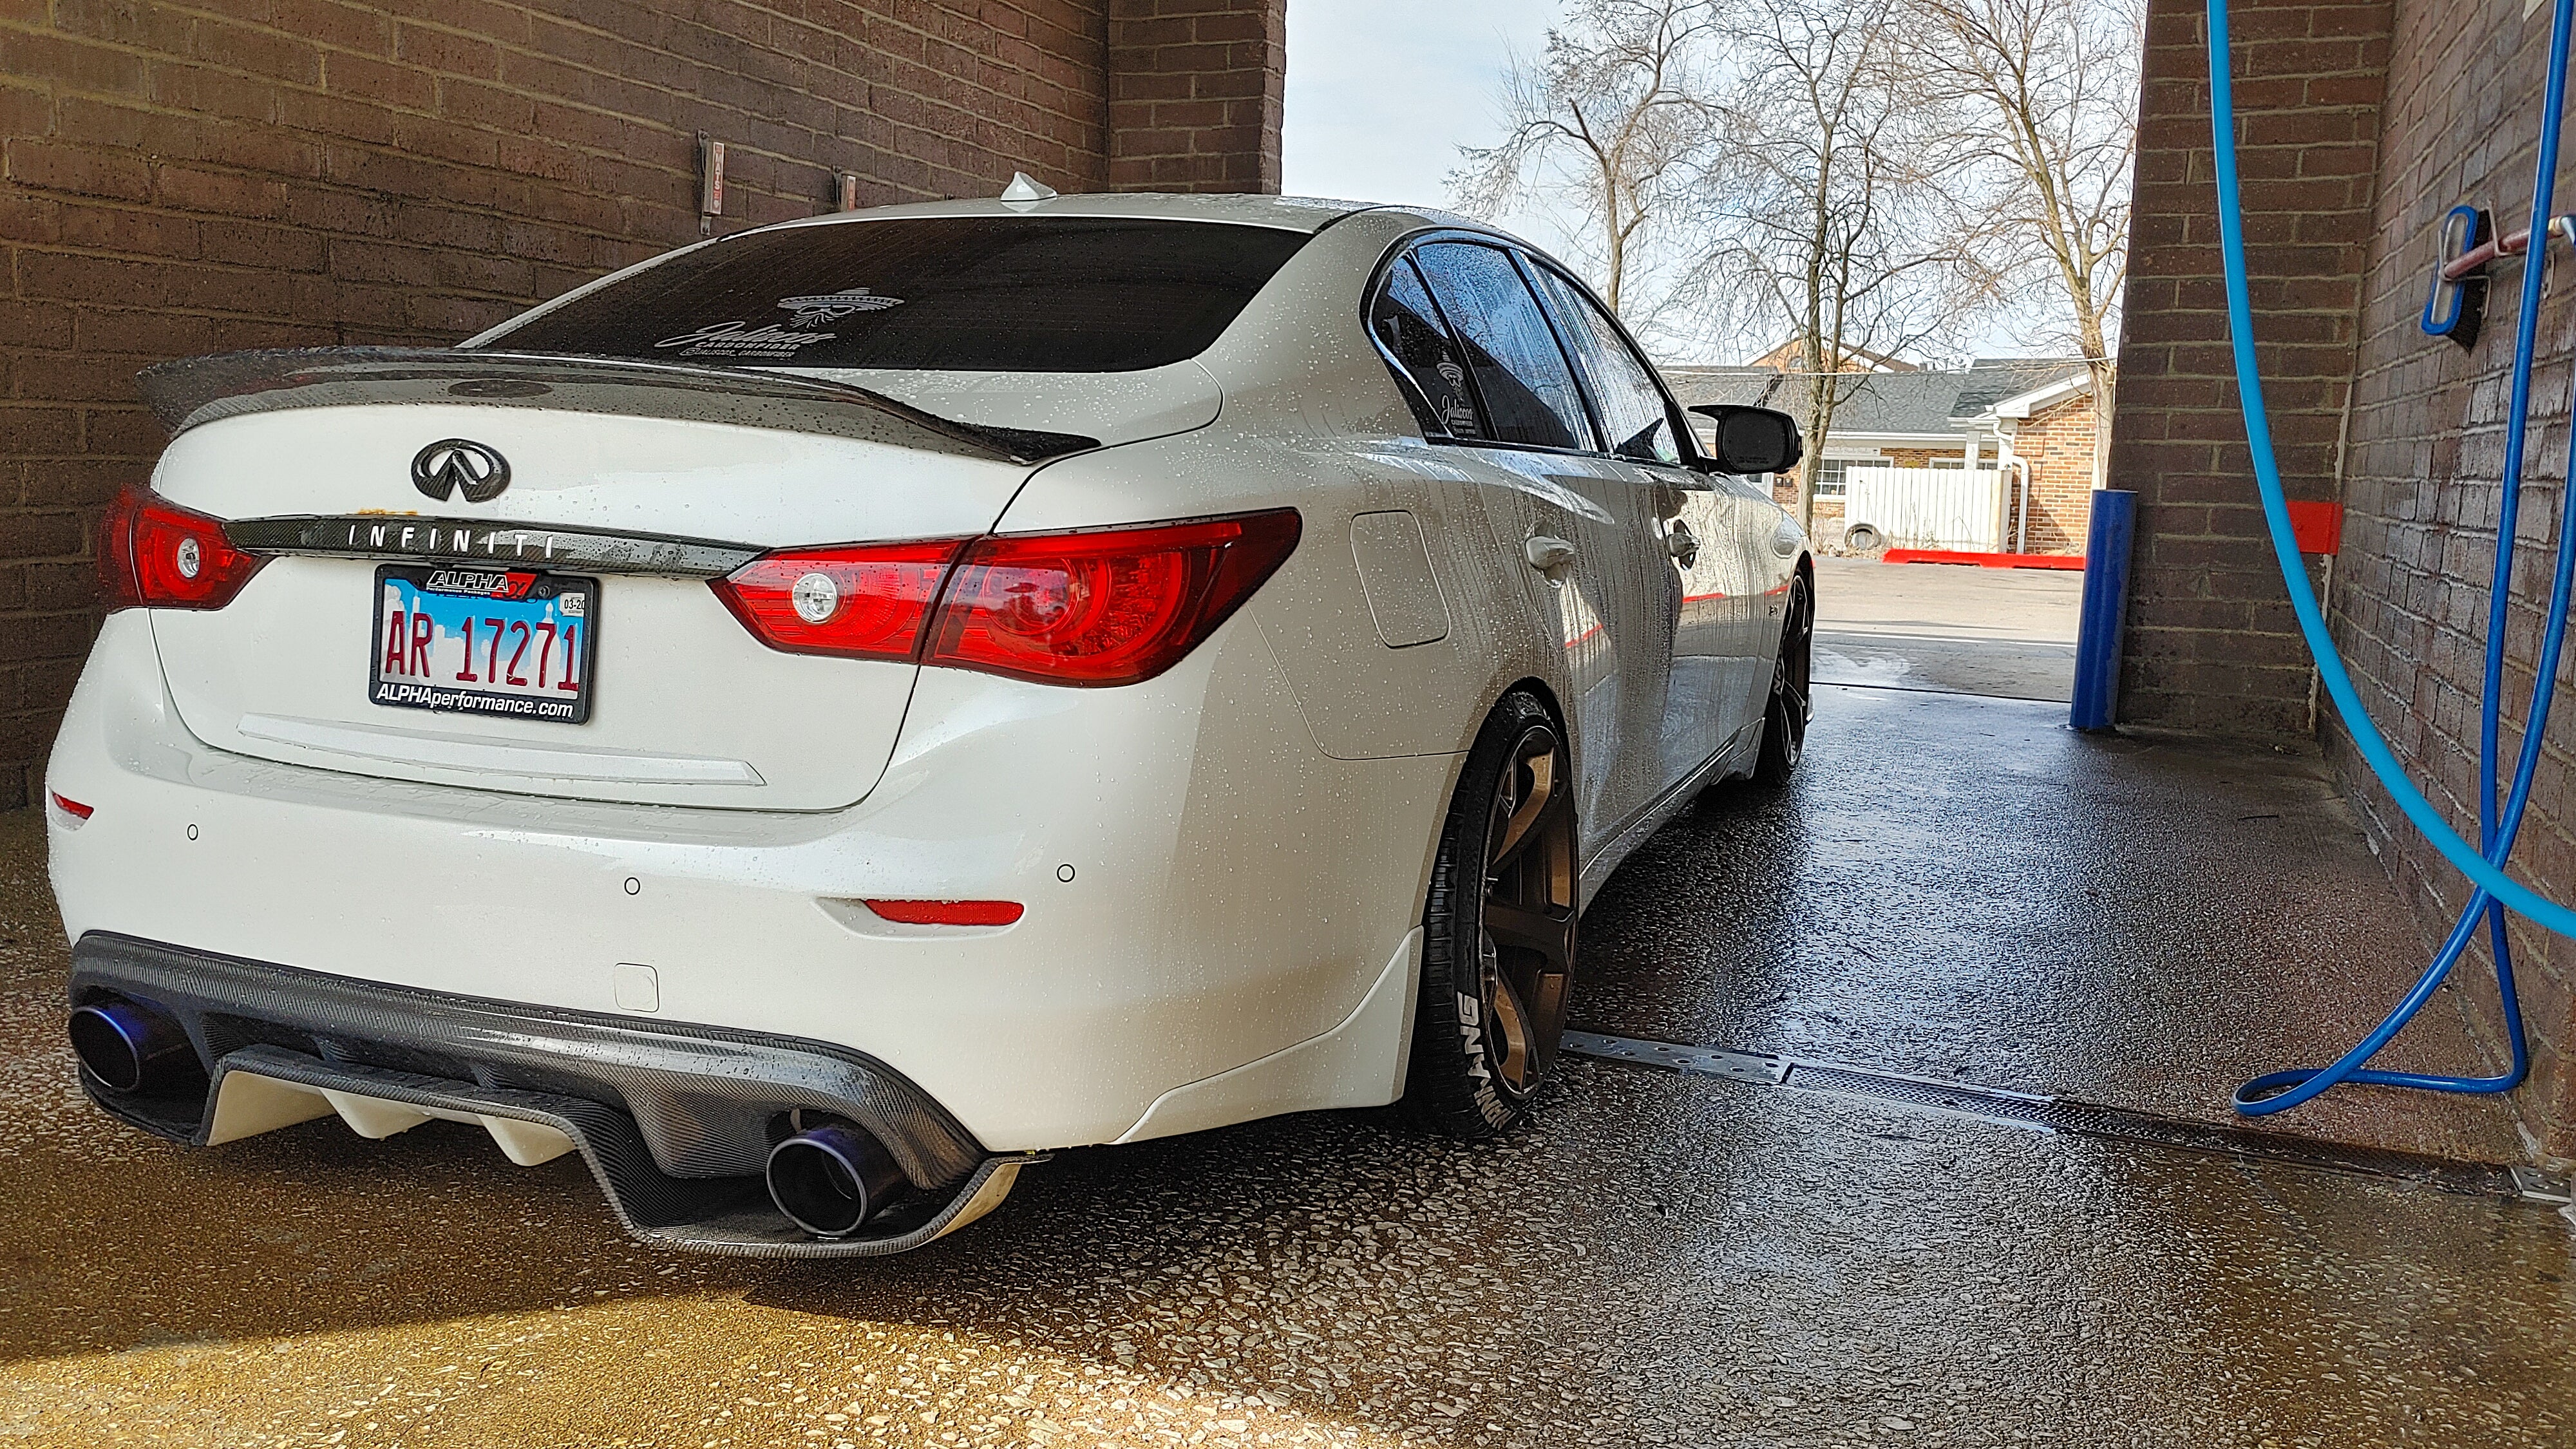 Infiniti Q50 with Jalisco's V2 Duckbill Spoiler attached using double-sided tape, showcasing the ease of installation